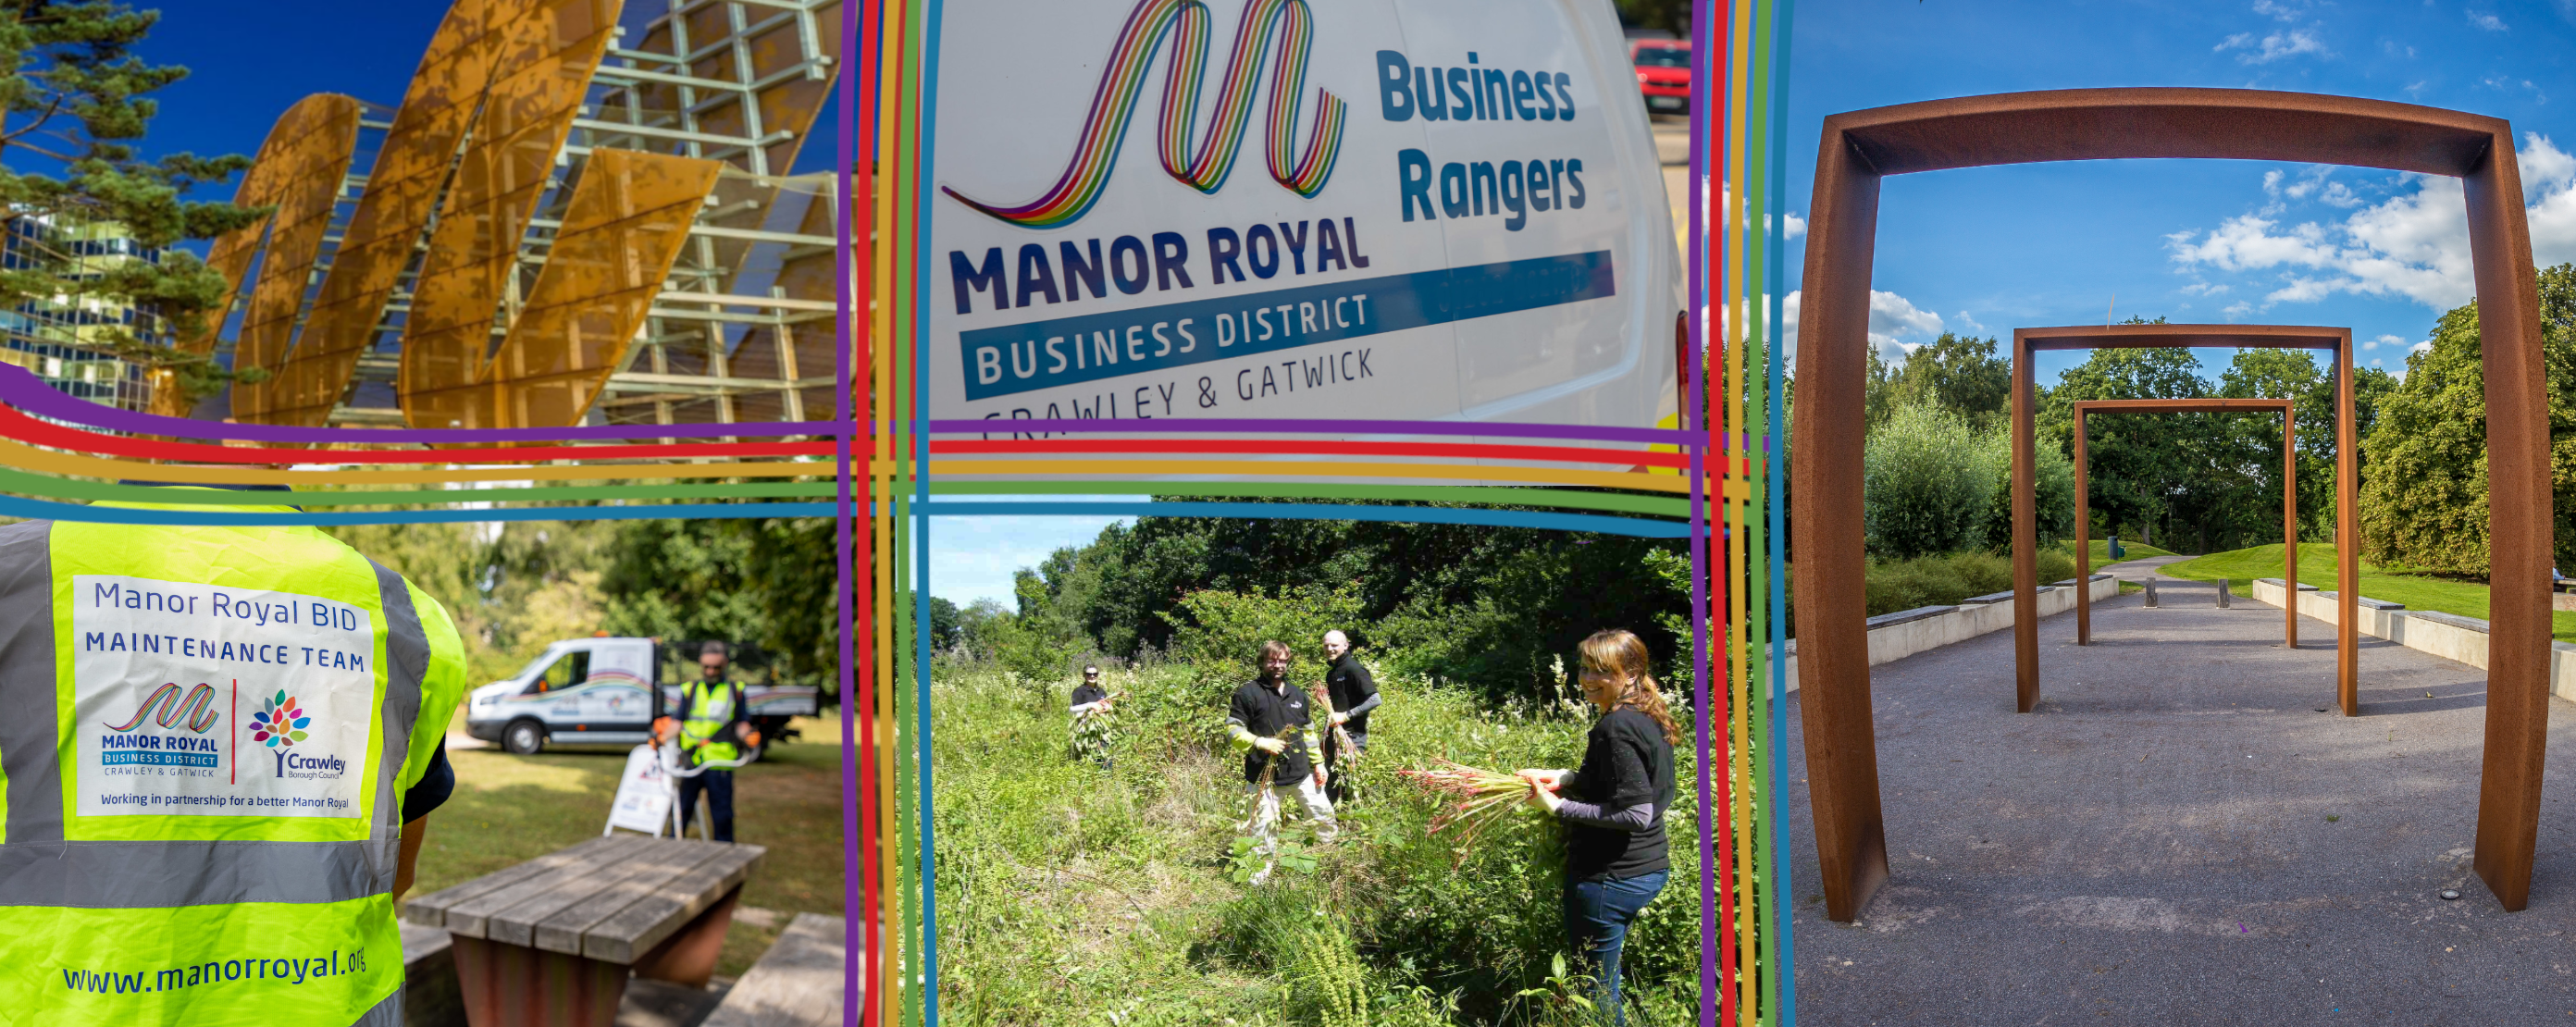 Manor Royal Business District Crawley